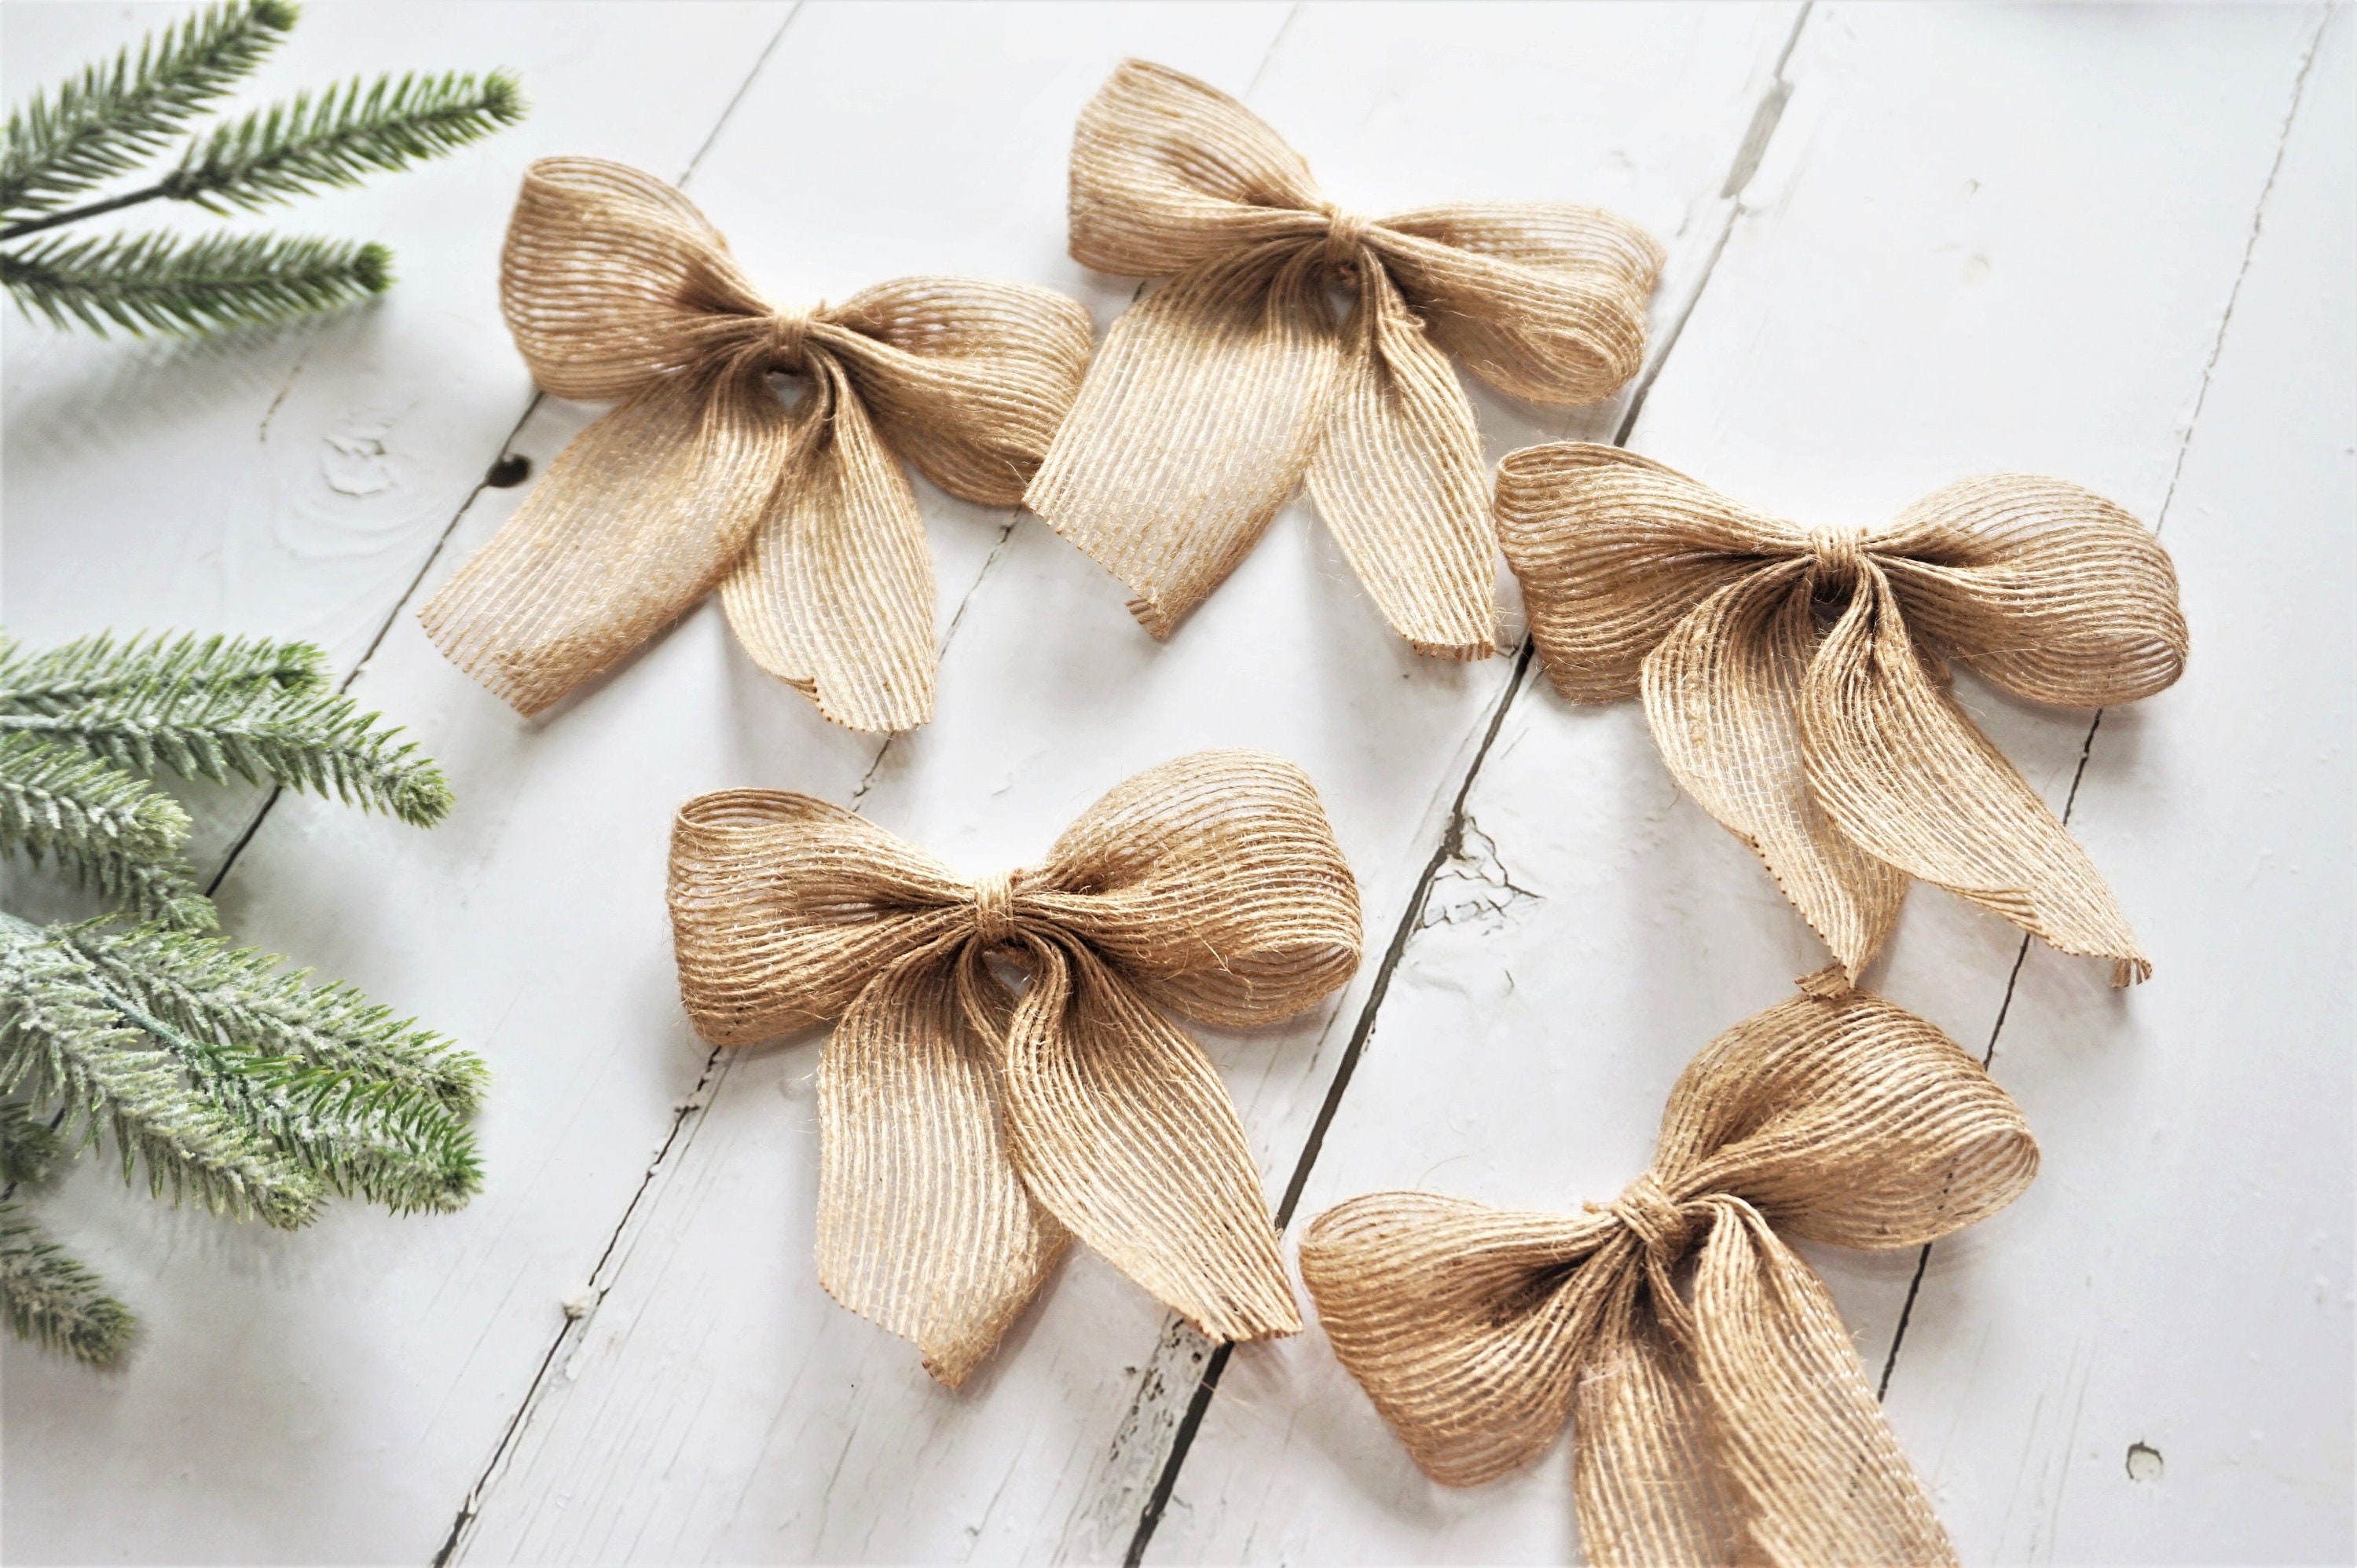 5/10/15/20 Pre-Tied Burlap Bows for Gift Wrapping, Christmas Gift, Wedding  Cake Bag, Candy Bag Bows, Card Decor, Burlap Bows, Rustic Wedding